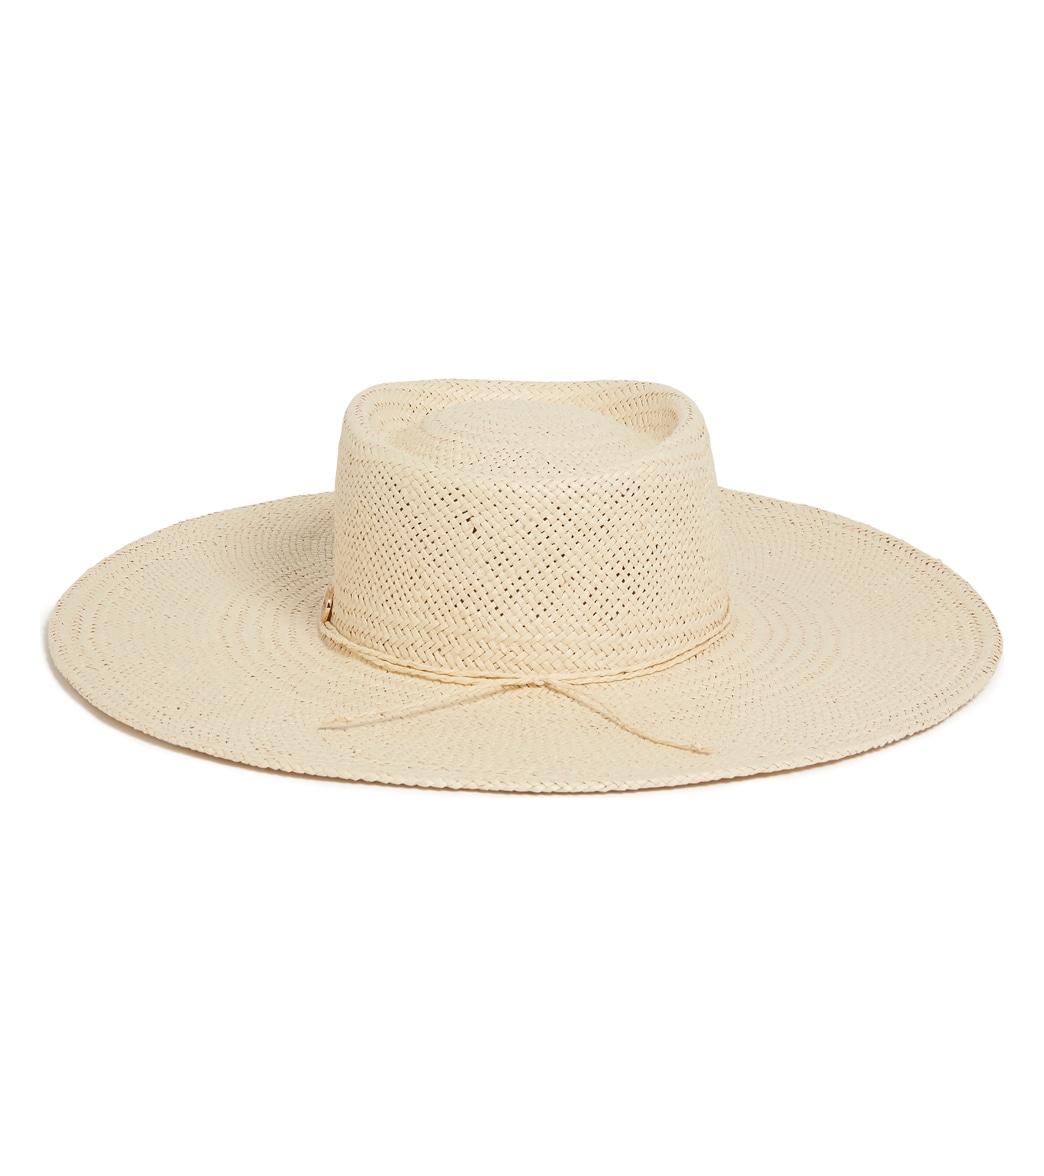 Seafolly Women's Shady Lady Sundown Boater Hat - Natural One Size - Swimoutlet.com